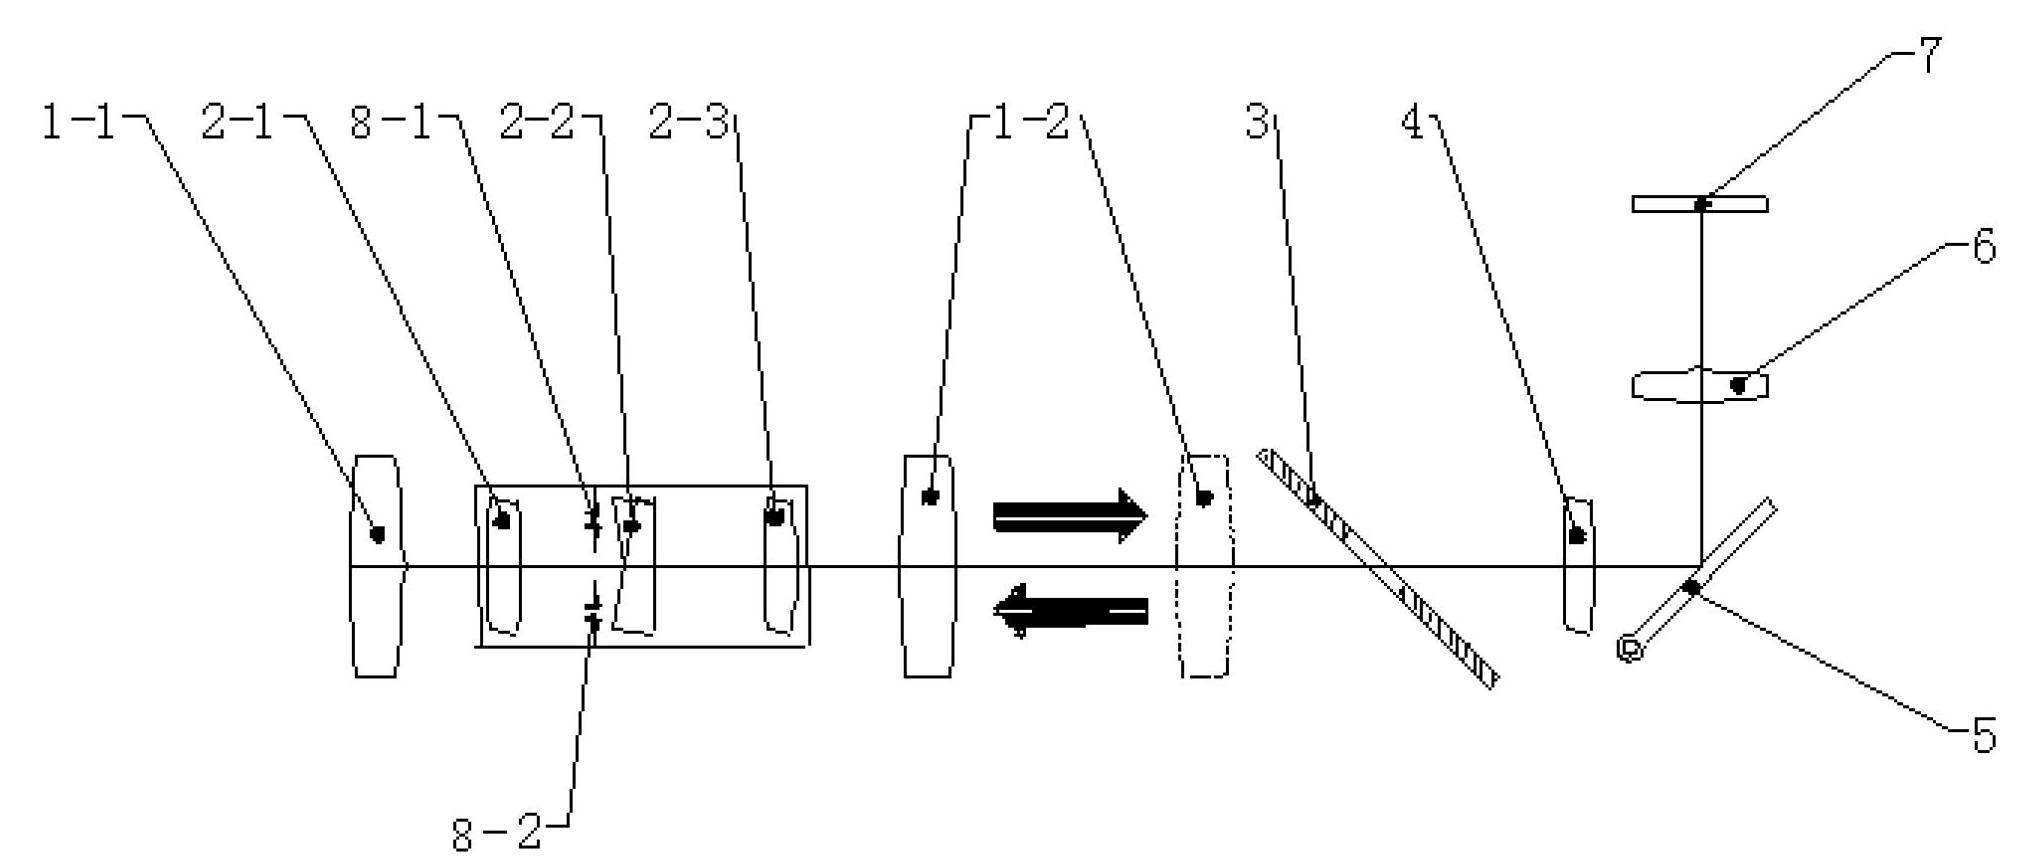 Alignment light path device applied to retinal imaging system